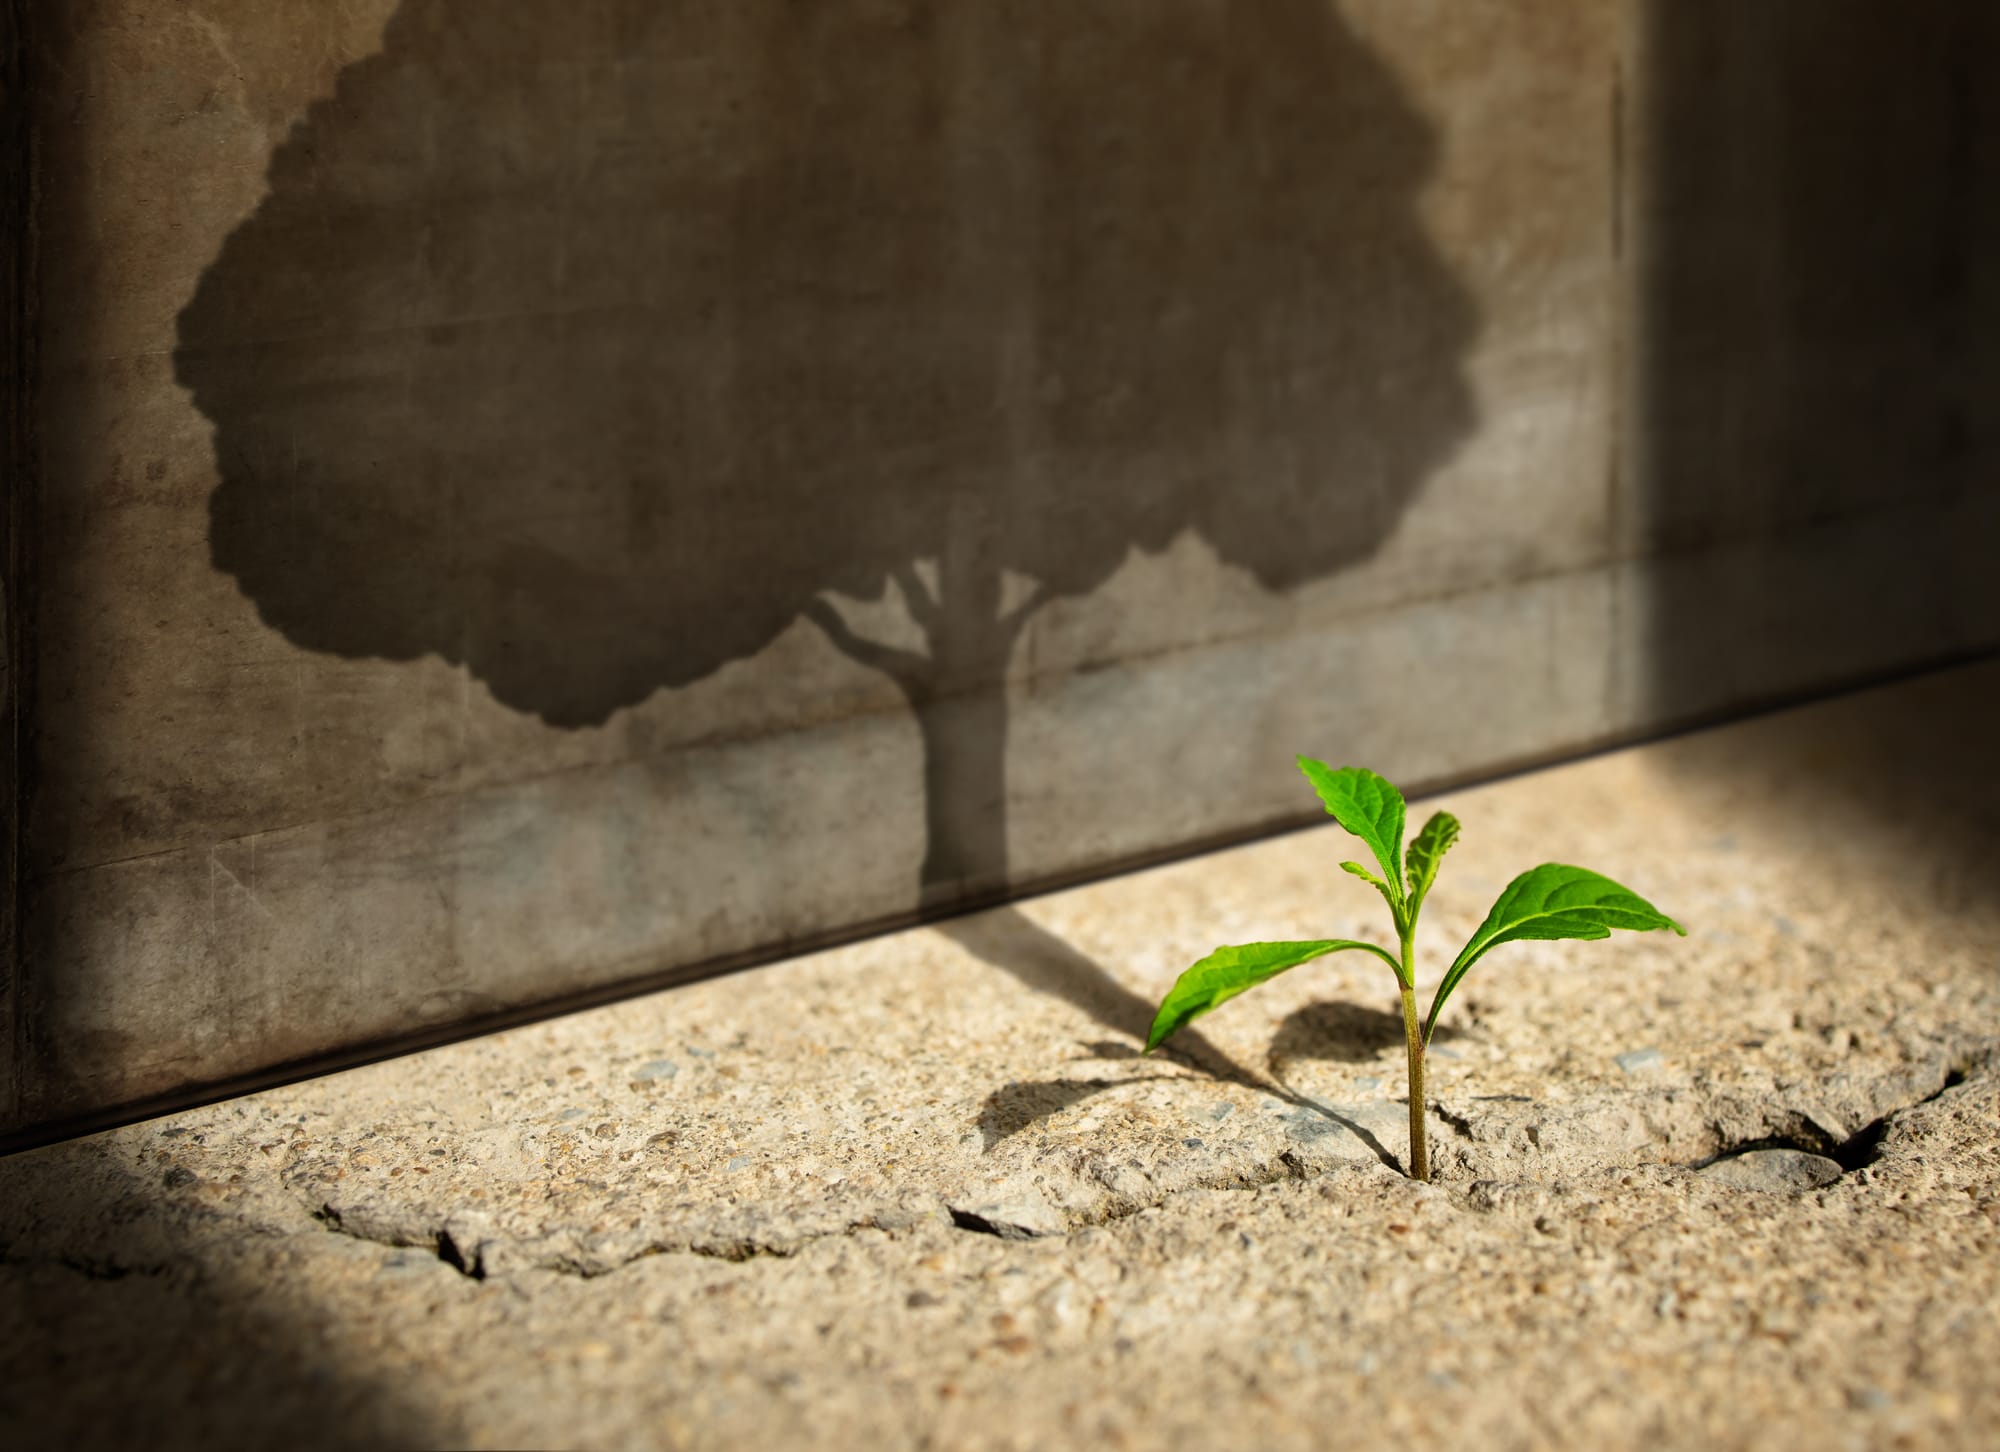 A small plant sprouts from a crack in a concrete floor, casting a shadow of a giant tree on a nearby wall.